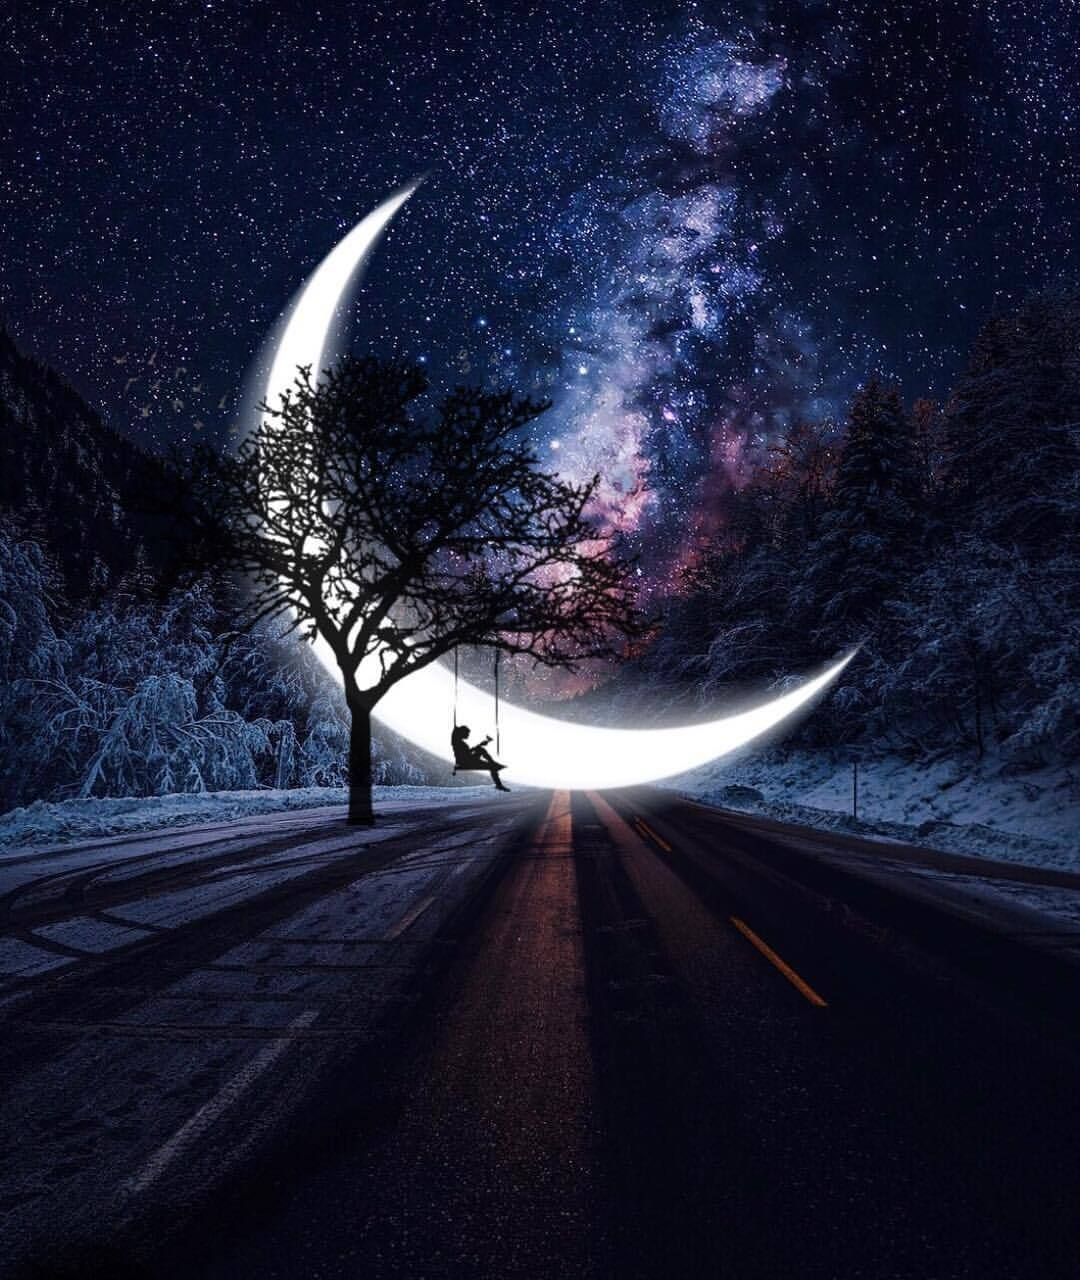 My inner world does revolve around another star. Moonlight photography, Night sky wallpaper, Beautiful nature wallpaper